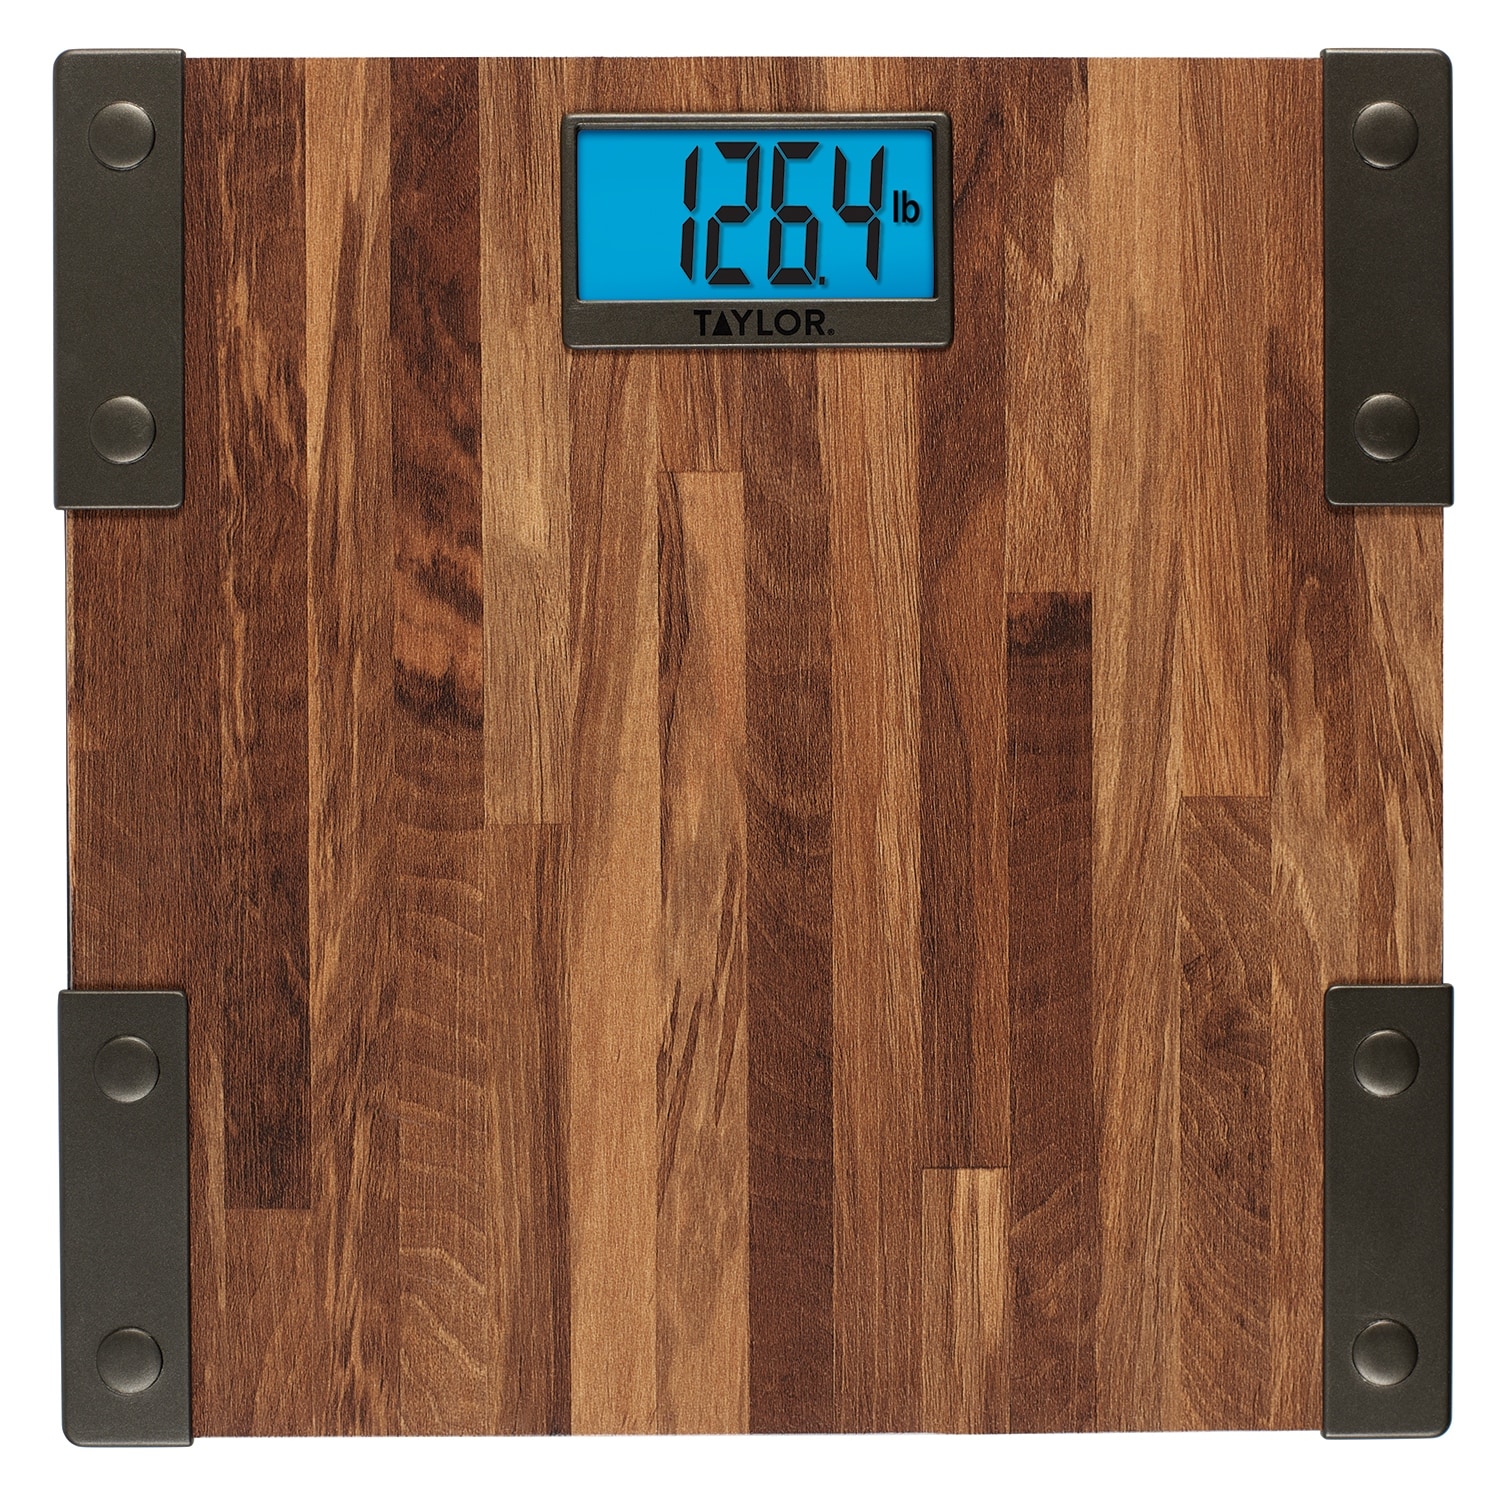 https://ak1.ostkcdn.com/images/products/is/images/direct/c991bfe63b62cd0dc4b945d72aba2179ee2e5d3a/Taylor-Digital-440-lb-Capacity-Bathroom-Scale-Farmhouse-Wood.jpg